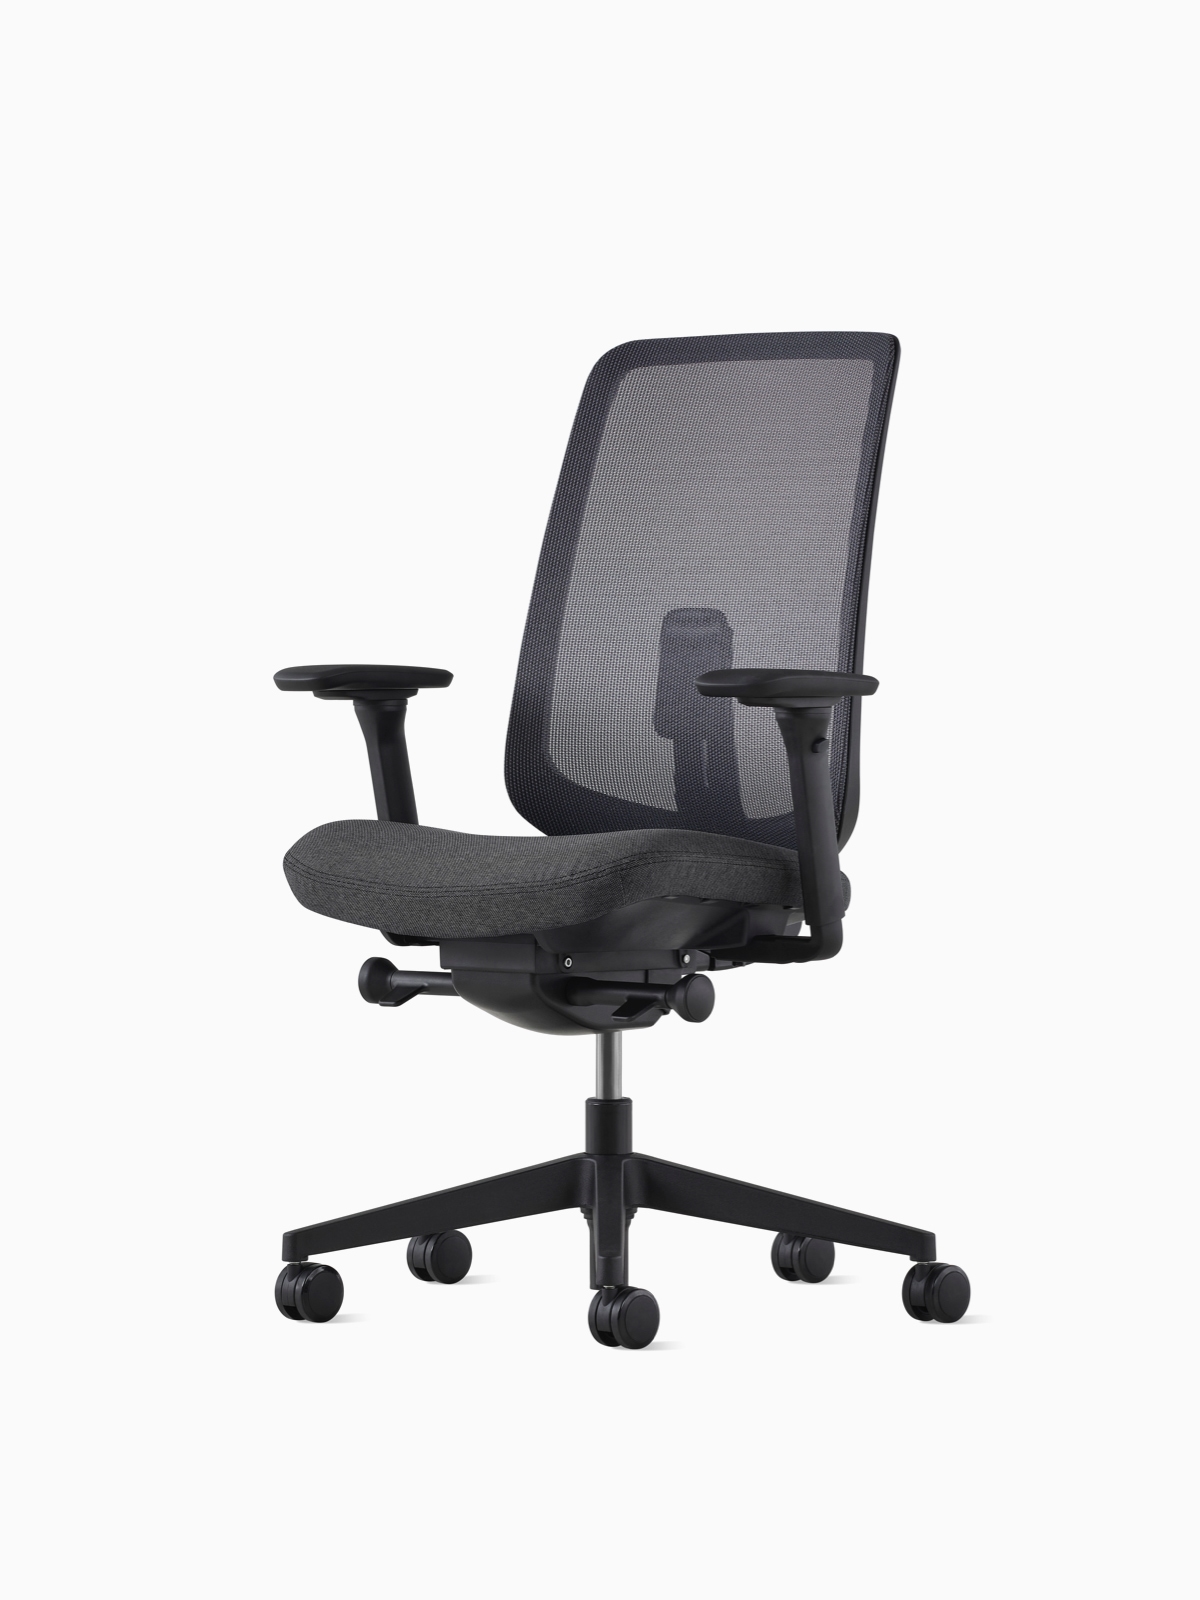 https://www.hermanmiller.com/content/dam/hmicom/page_assets/products/verus_chairs/th_prd_verus_chairs_office_chairs_hv.jpg